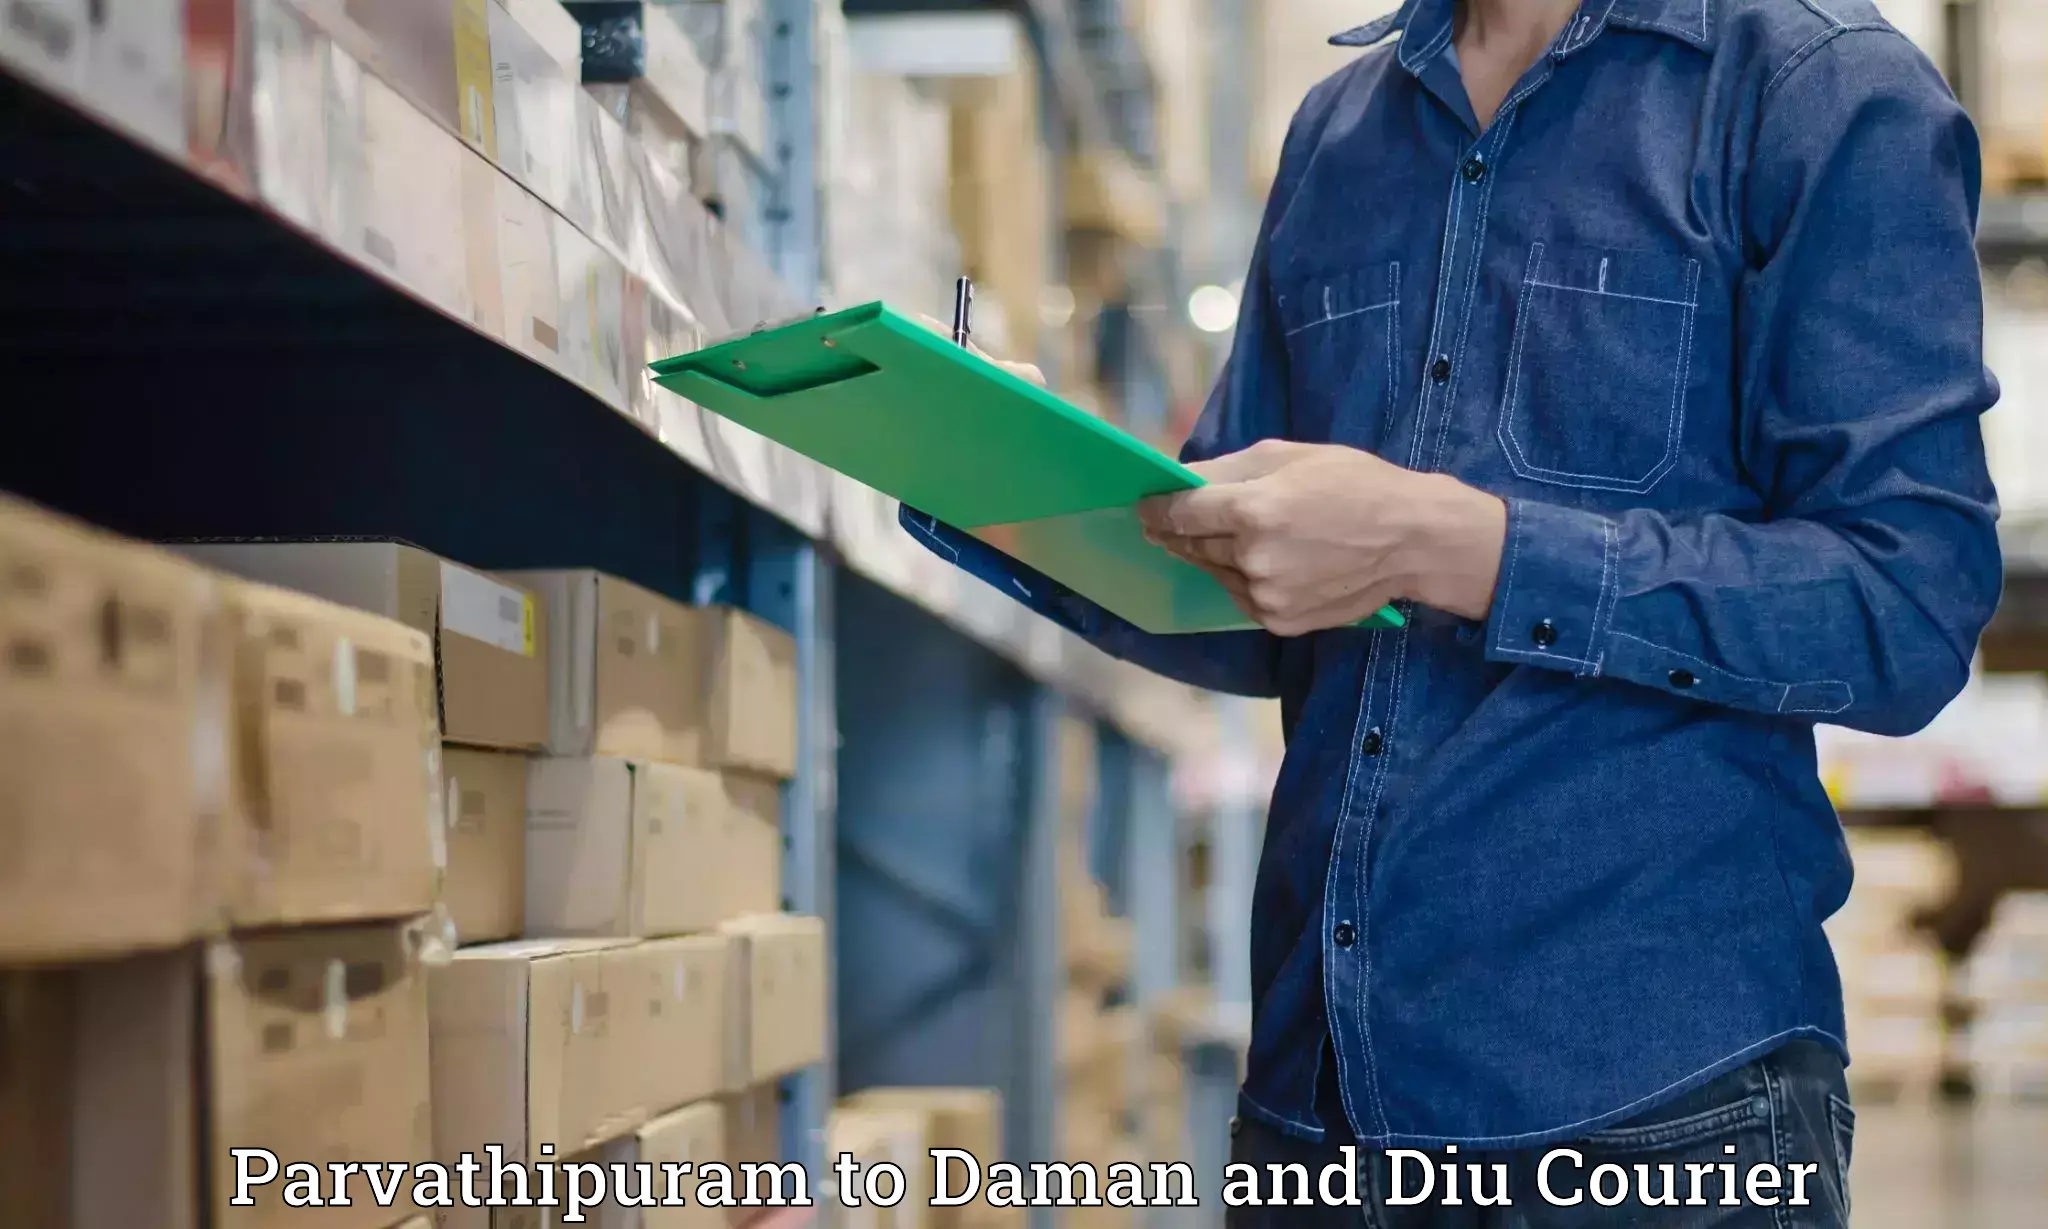 International courier networks Parvathipuram to Daman and Diu